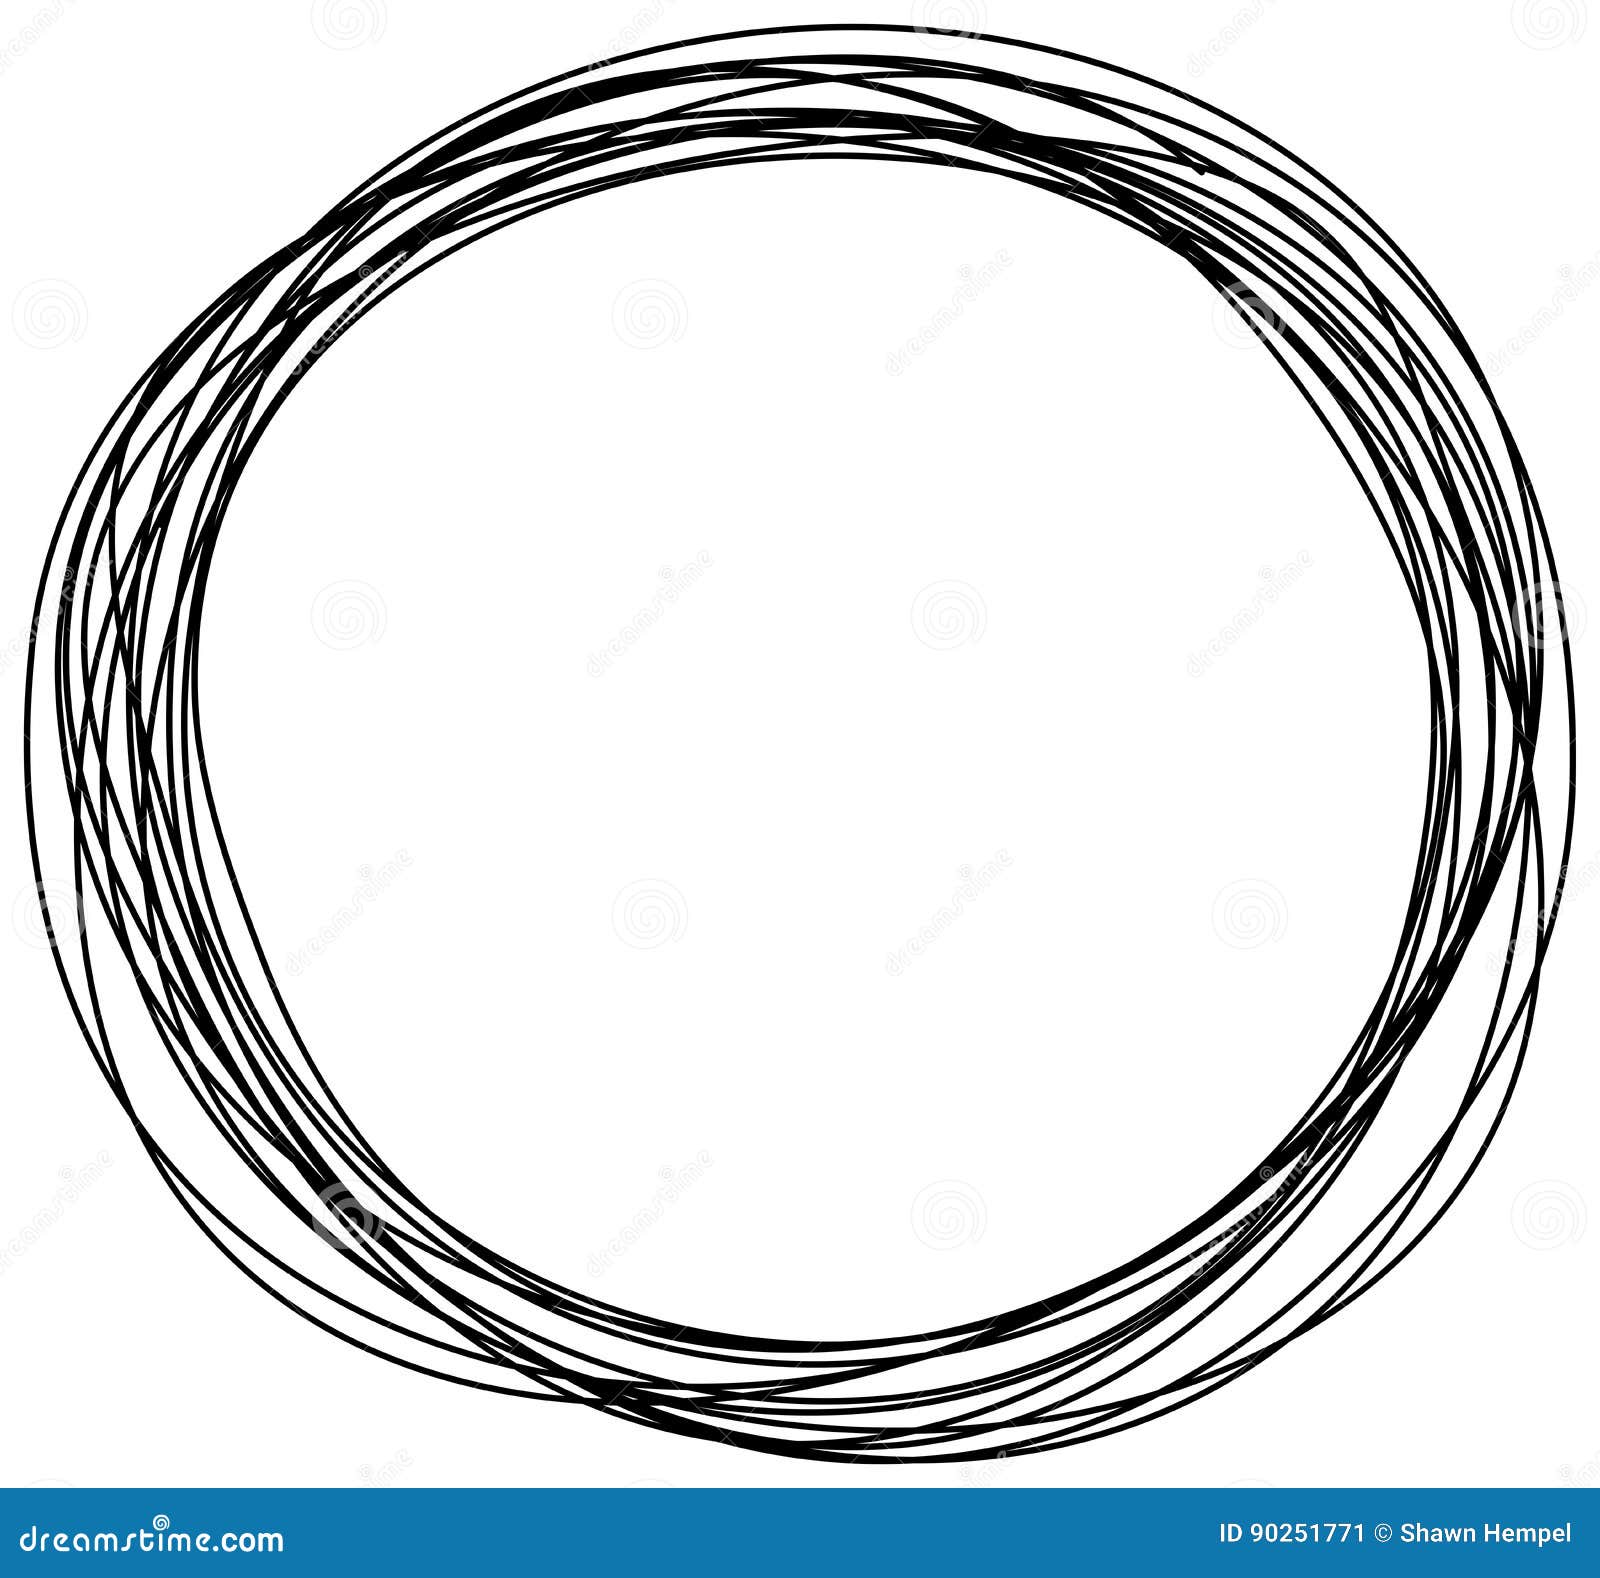 abstract hand drawn scribble doodle circle